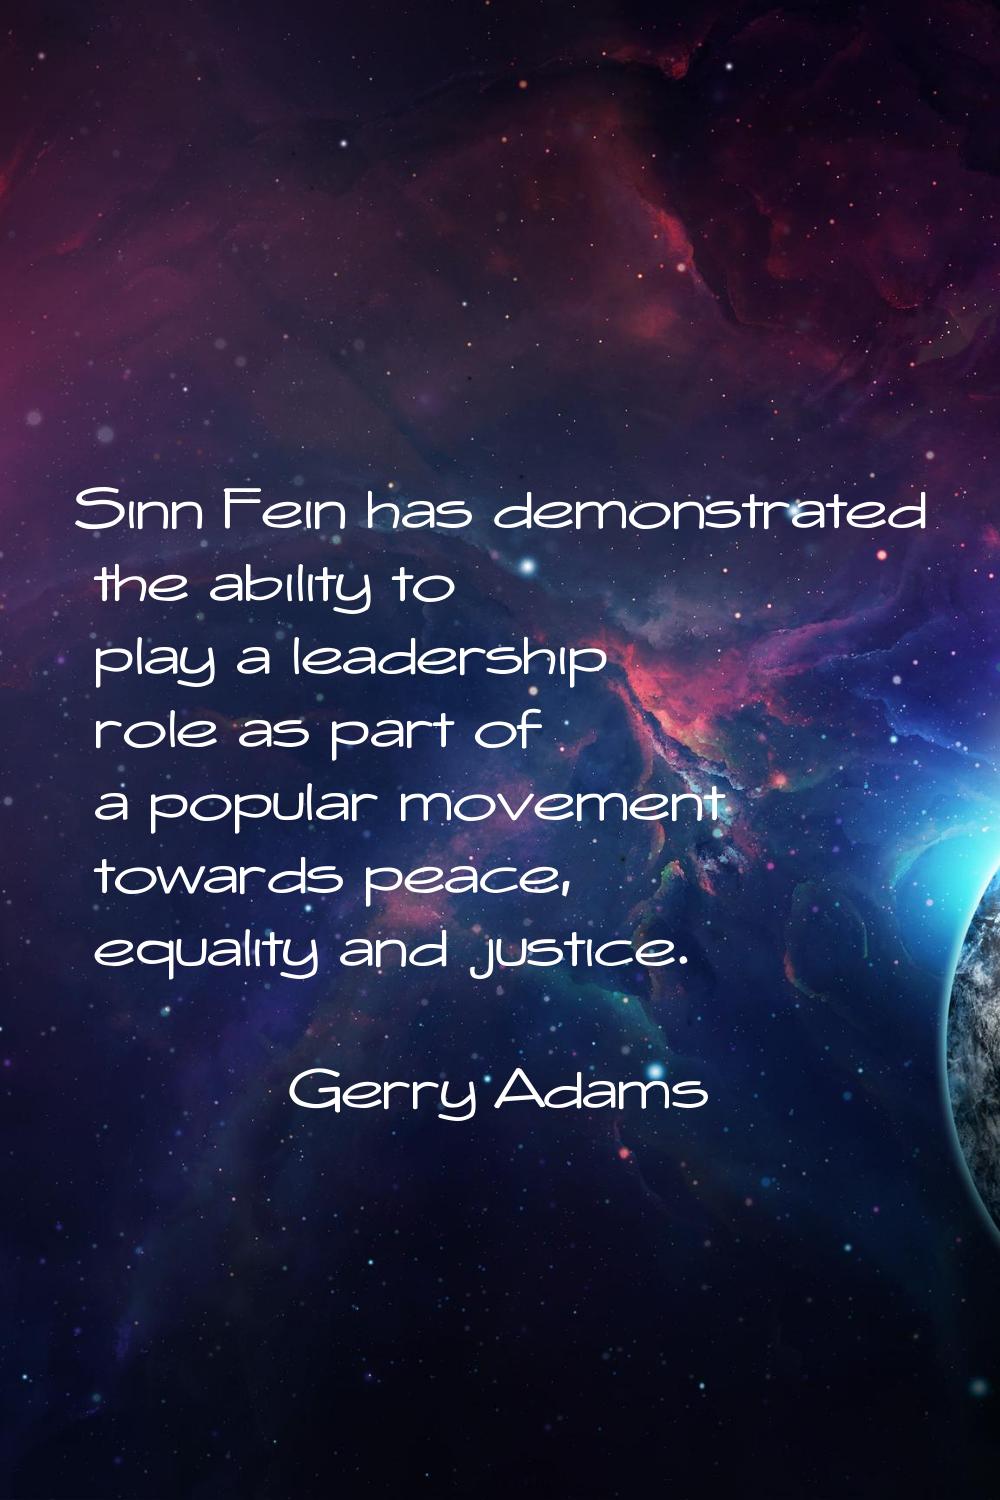 Sinn Fein has demonstrated the ability to play a leadership role as part of a popular movement towa